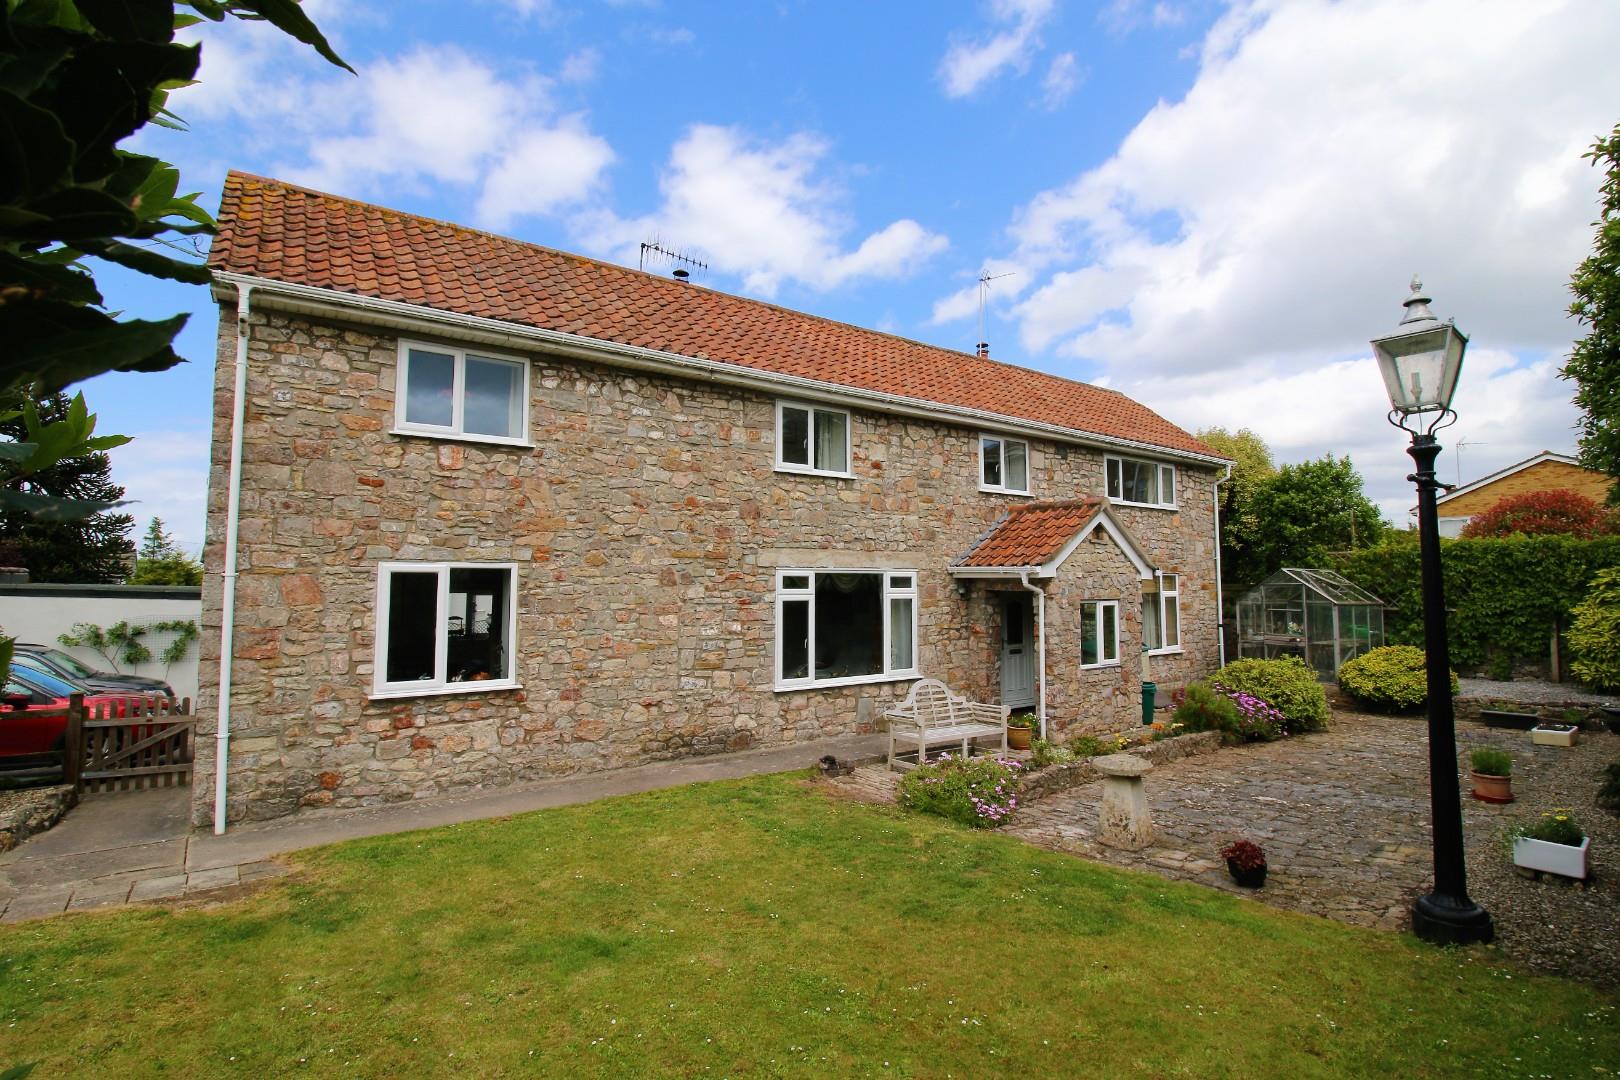 Charming cottage situated in sought after cul de sac in Yatton